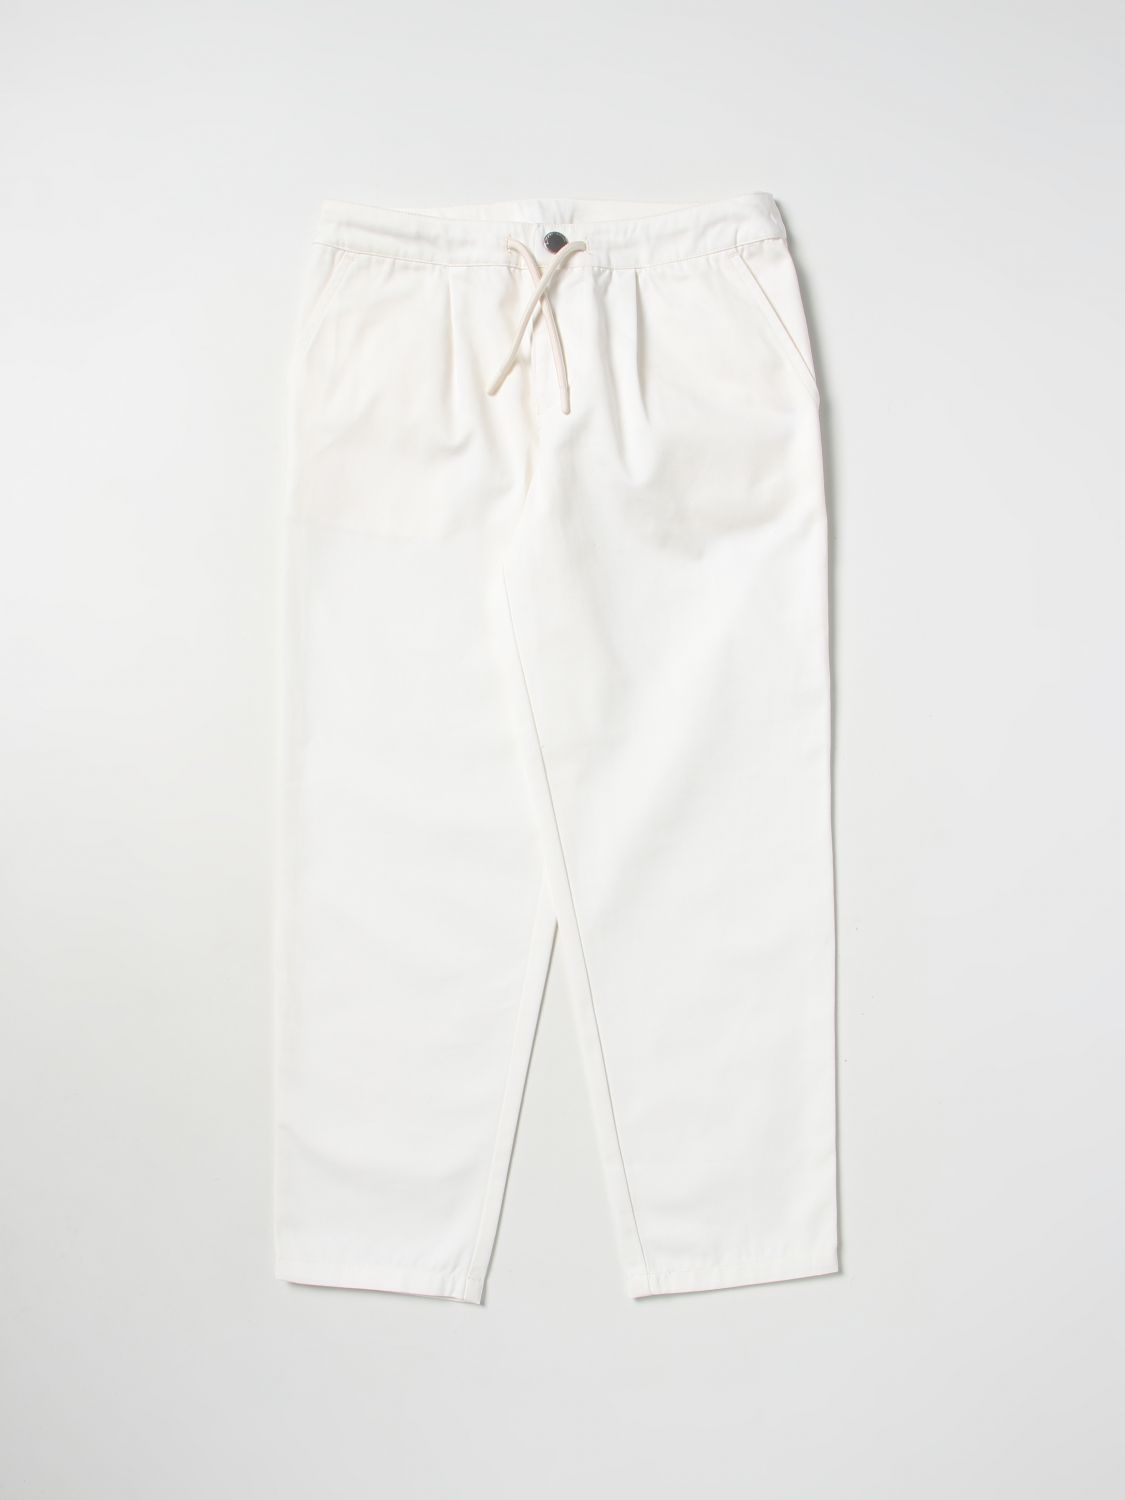 Emporio Armani Hose  Kids Kinder Farbe Weiss In White